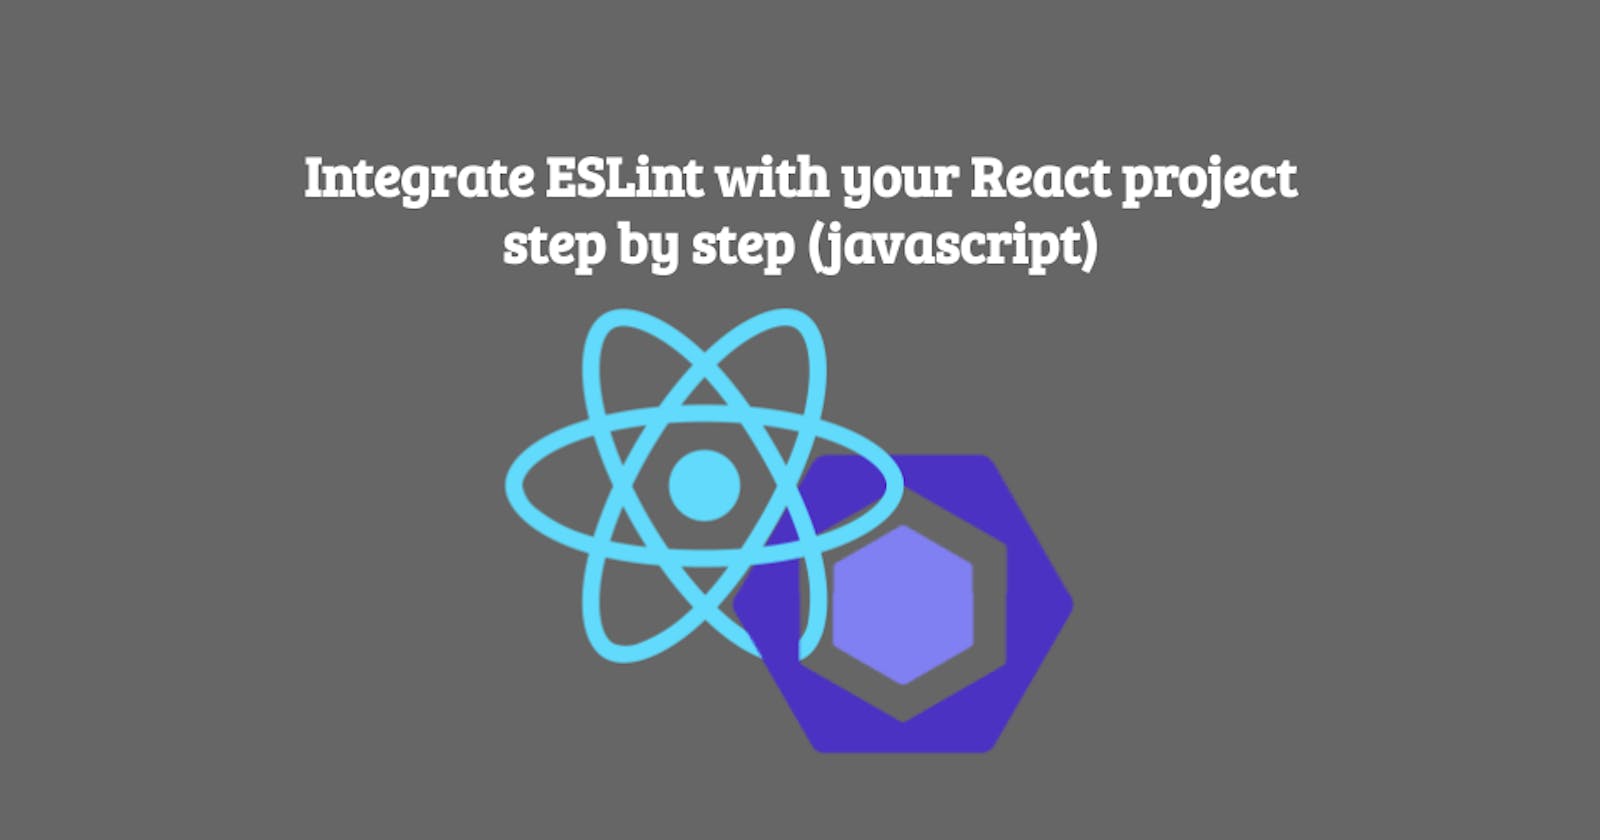 Integrate ESLint with your React project step by step (javascript)